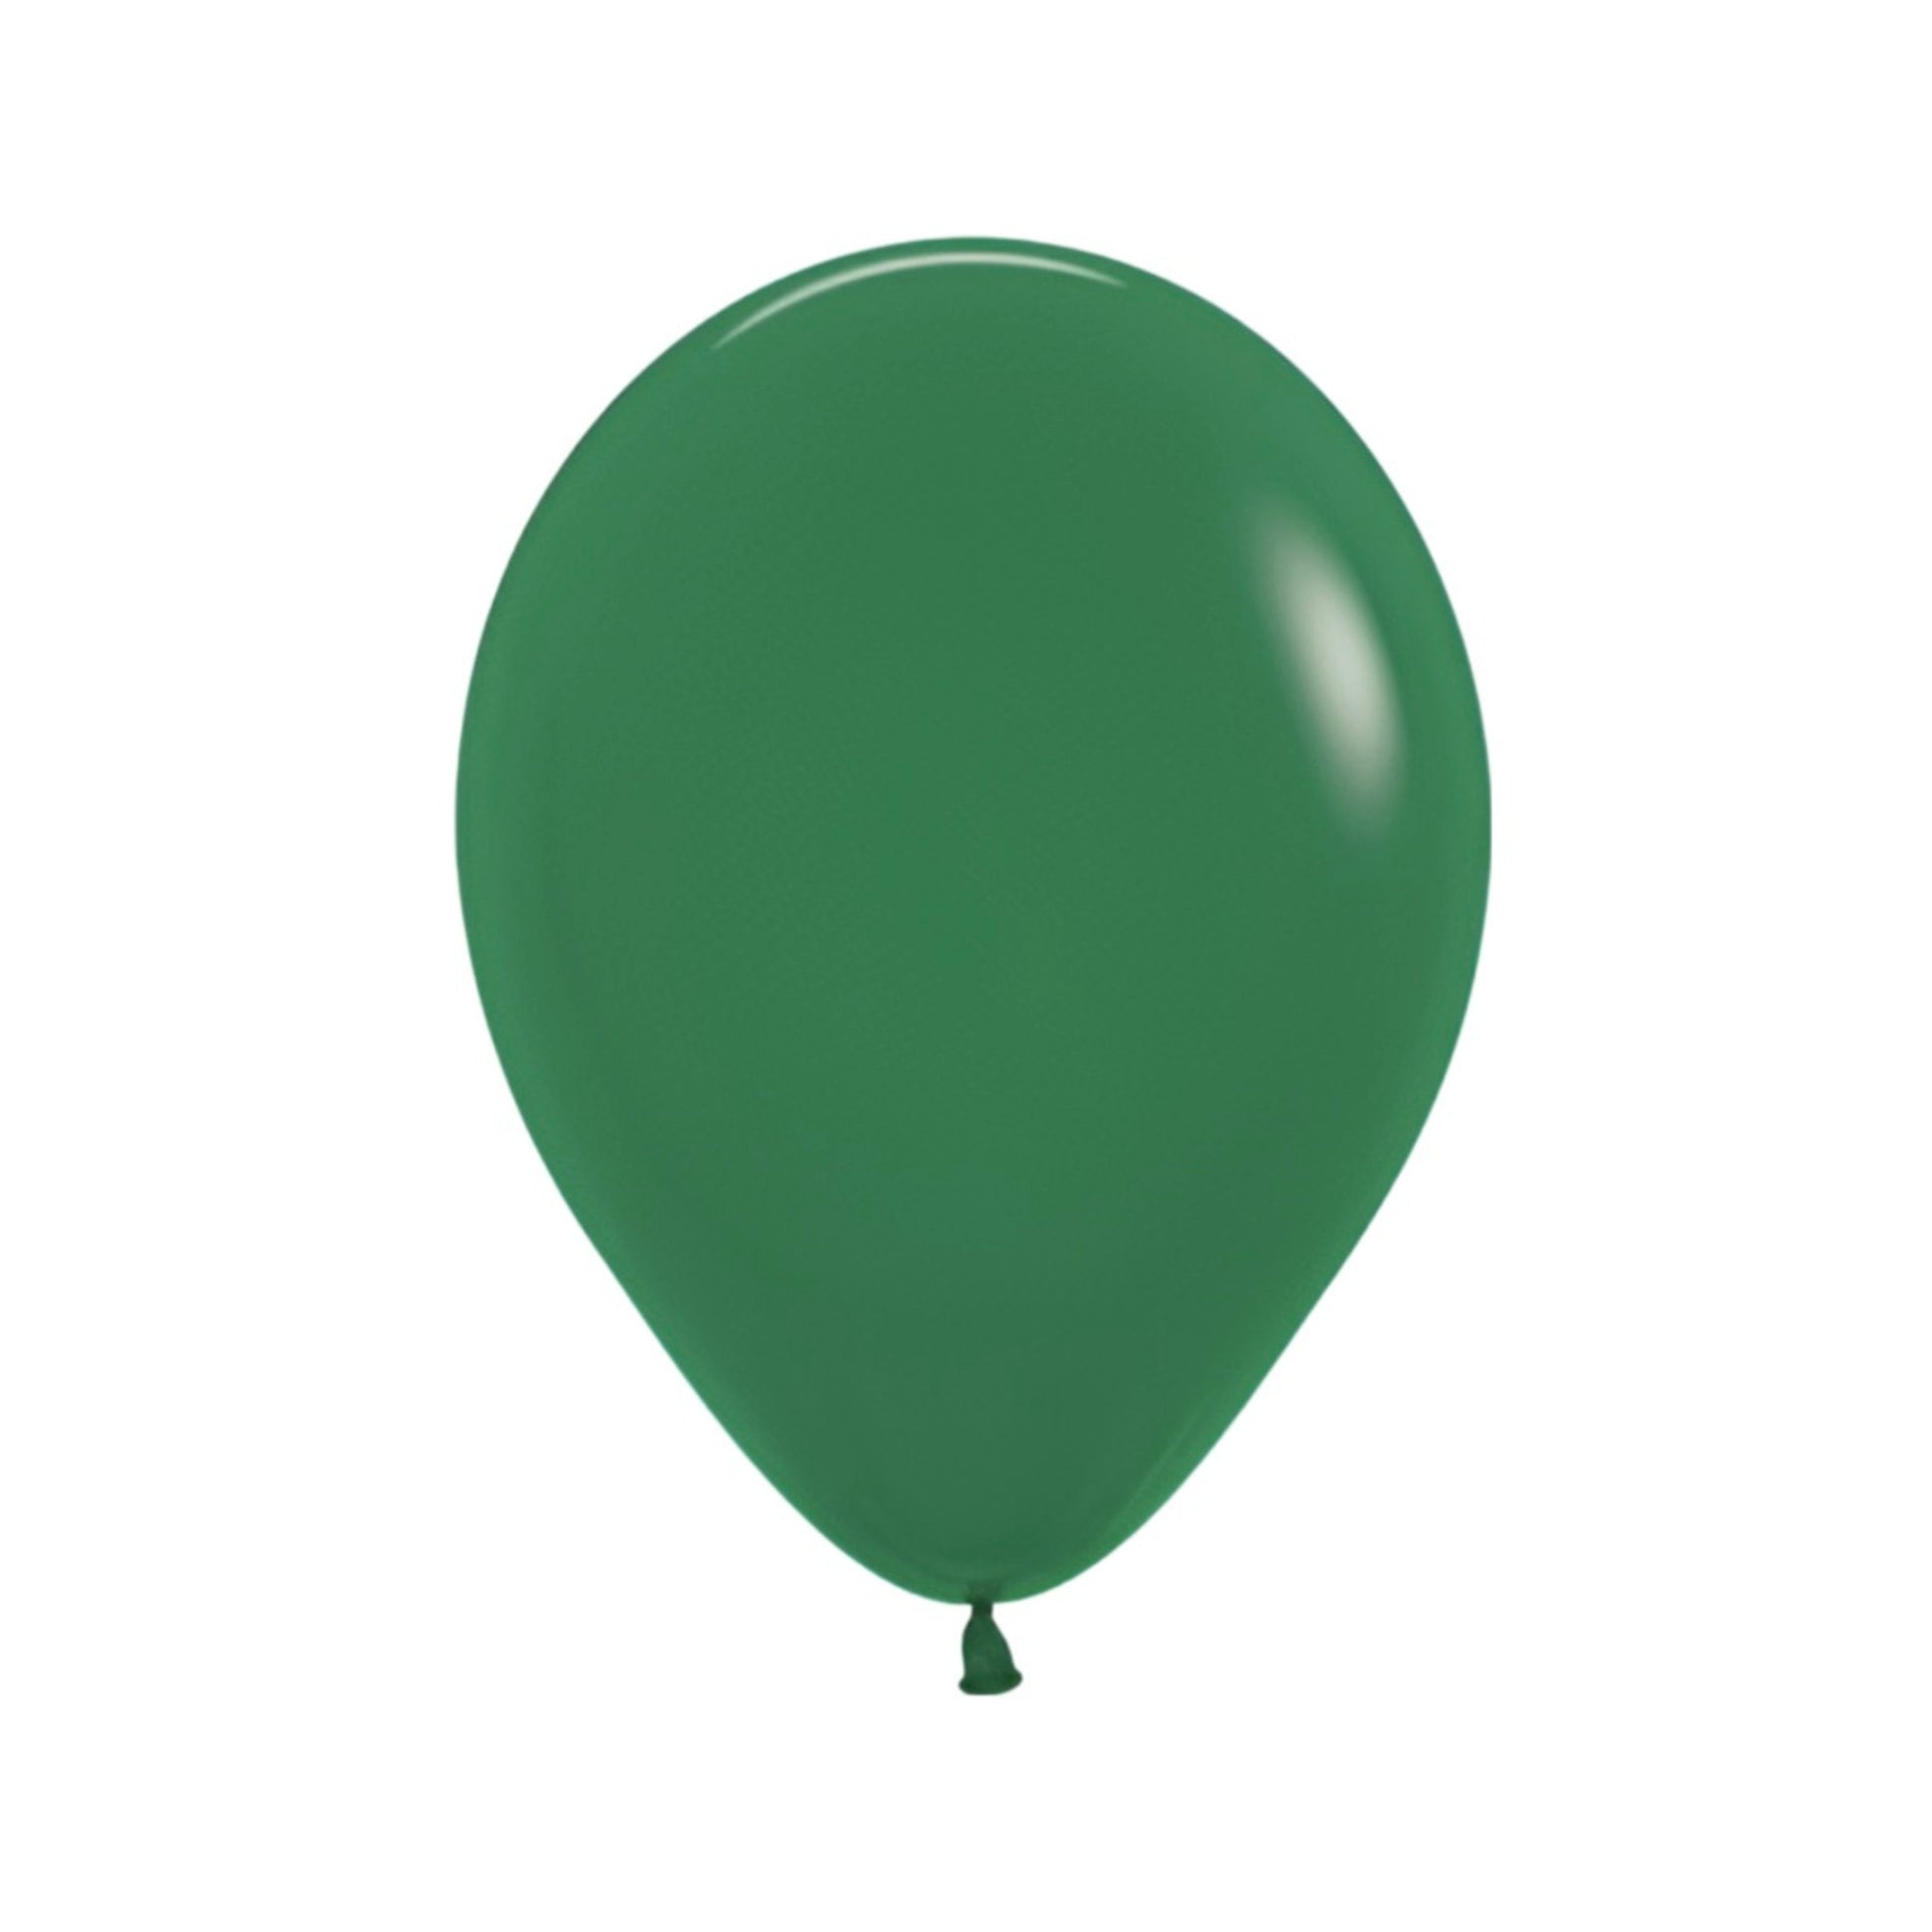 30cm Standard Size Forest Green coloured Balloon. Helium Quality